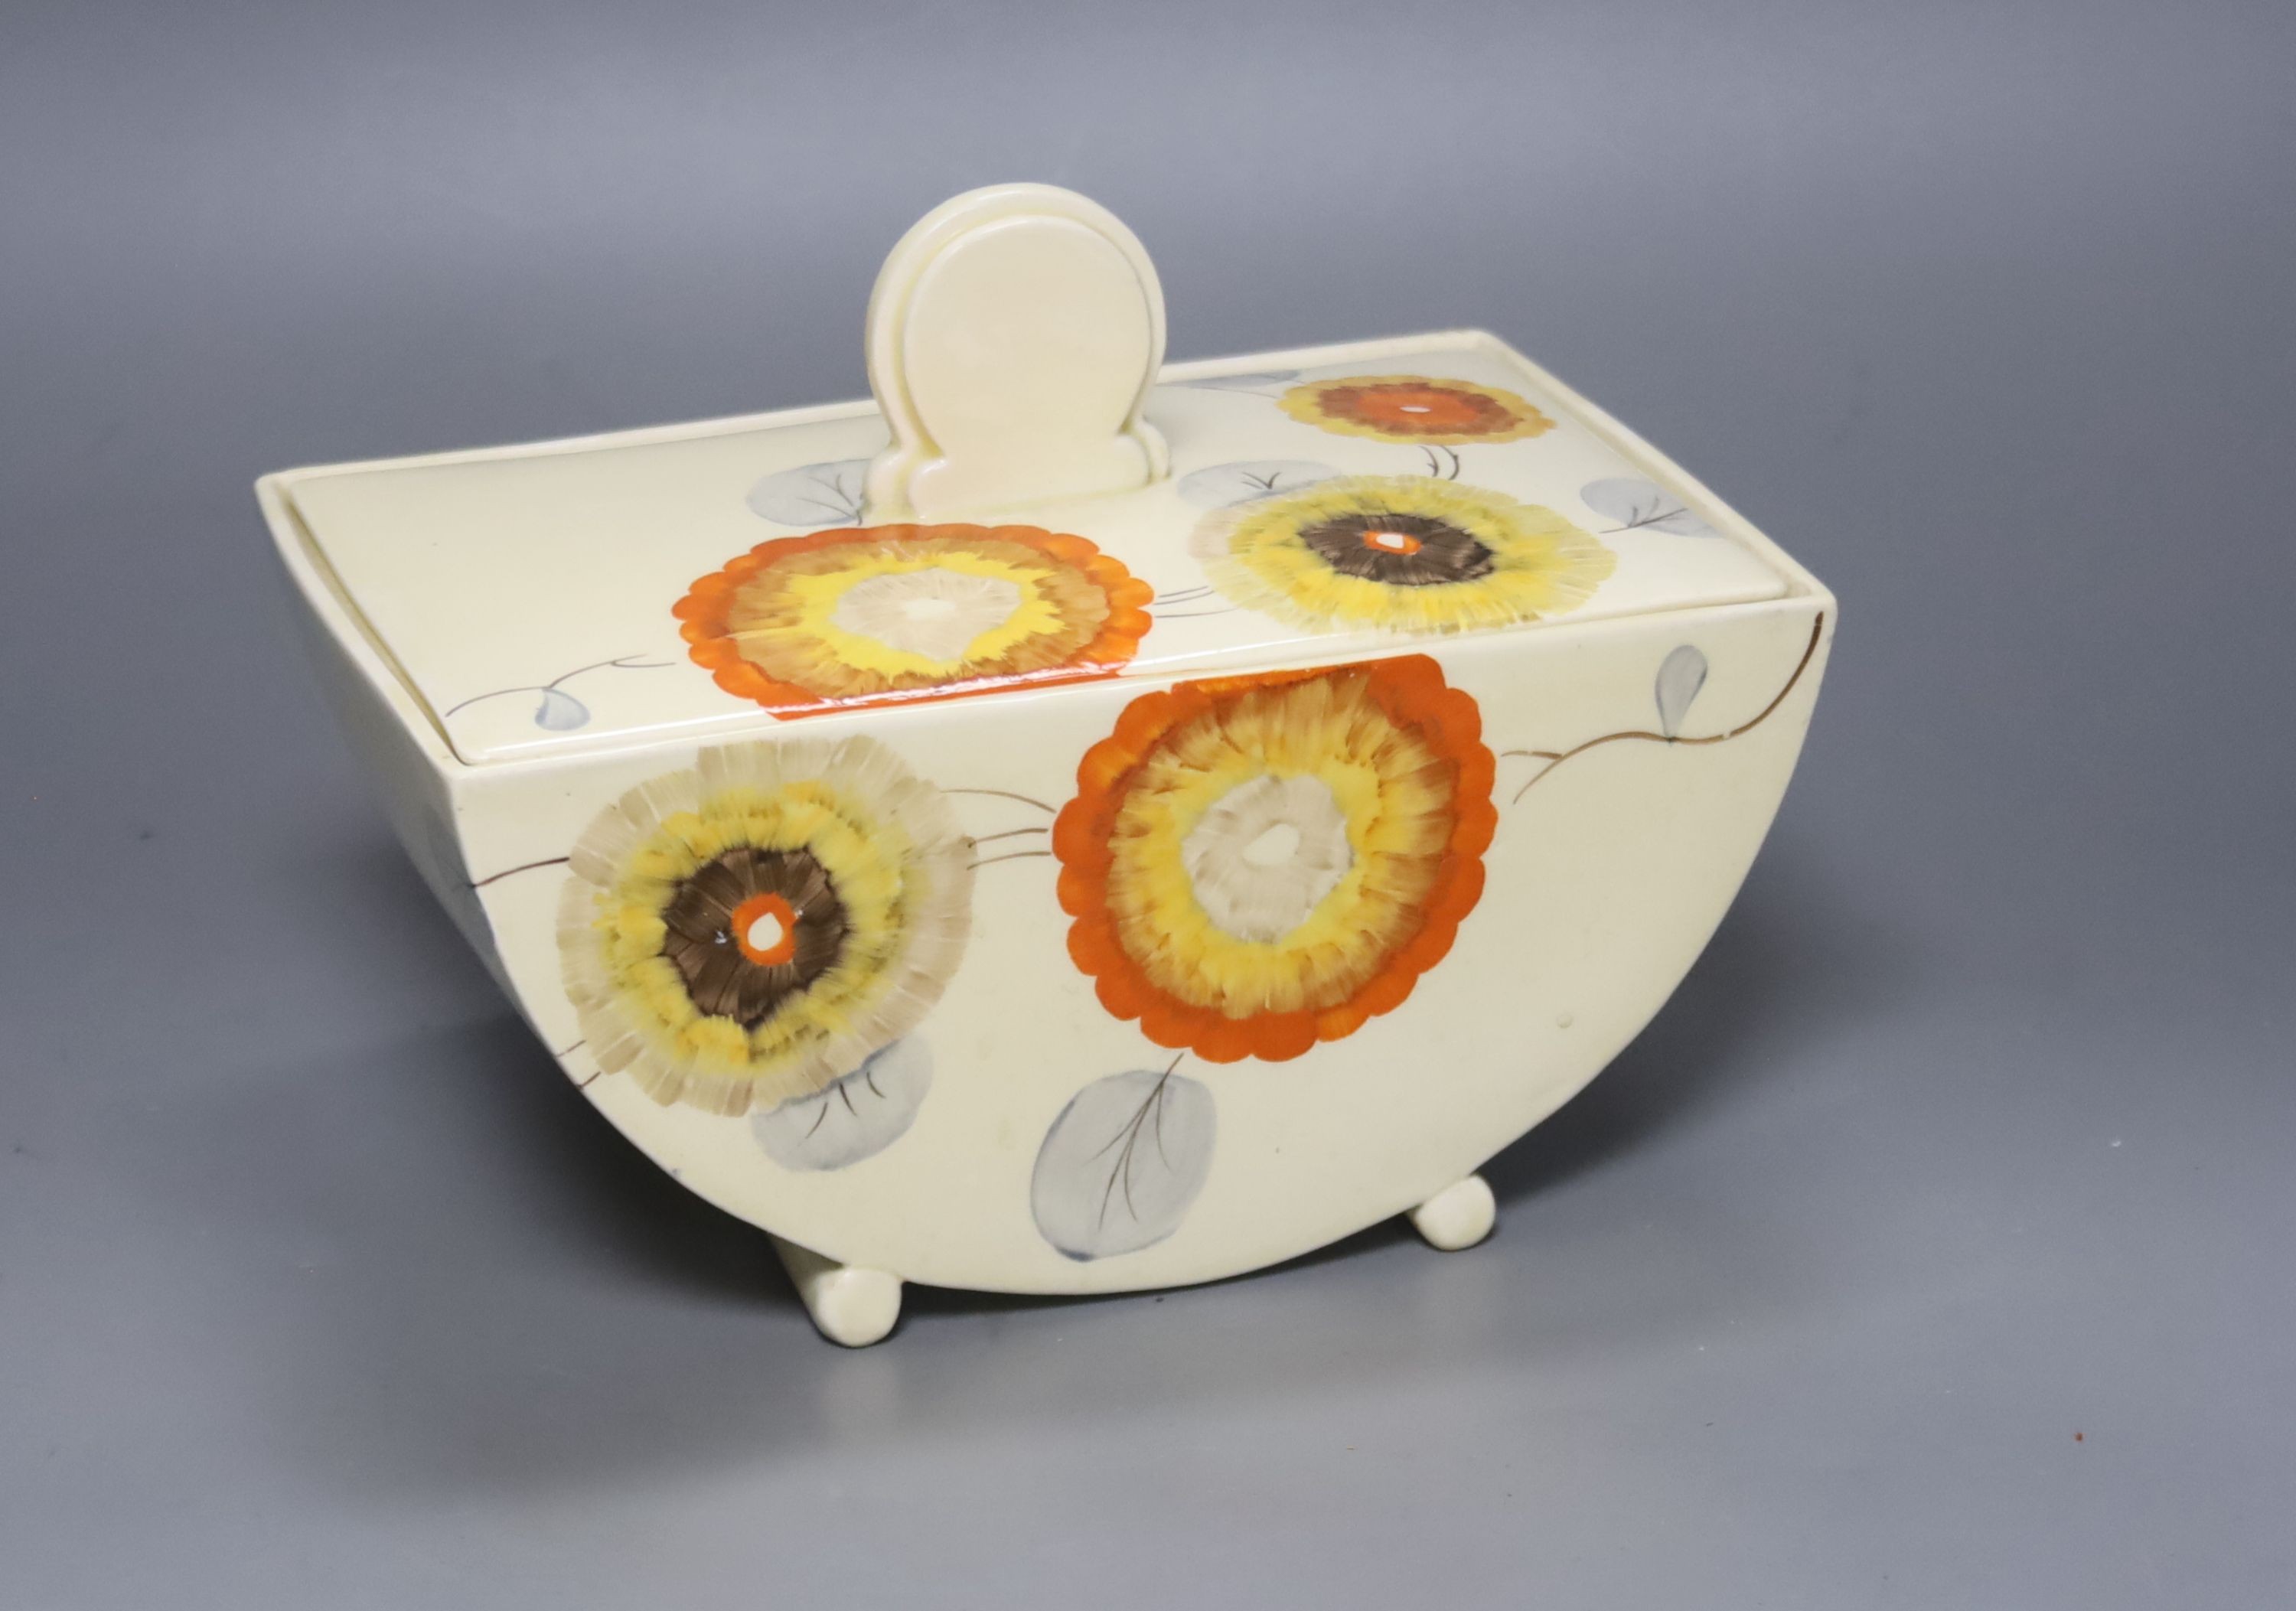 A Clarice Cliff tureen 'The Biarritz Royal Staffordshire Great Britain', Reg. No. 184849, height 20cm